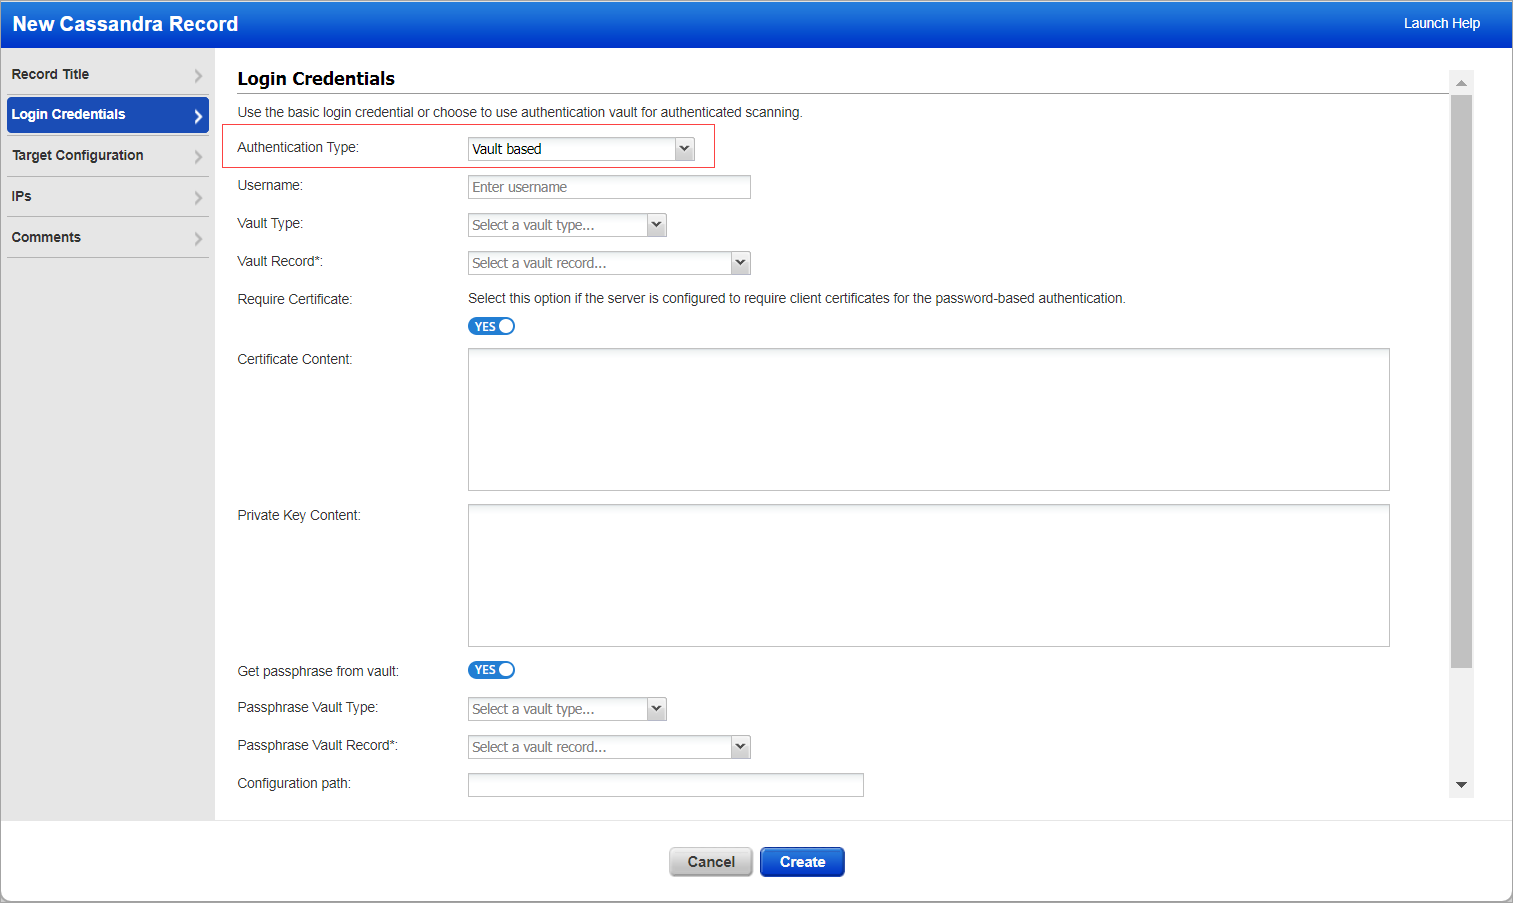 Login credentials tab with the Authentication Type selected as Vault Based